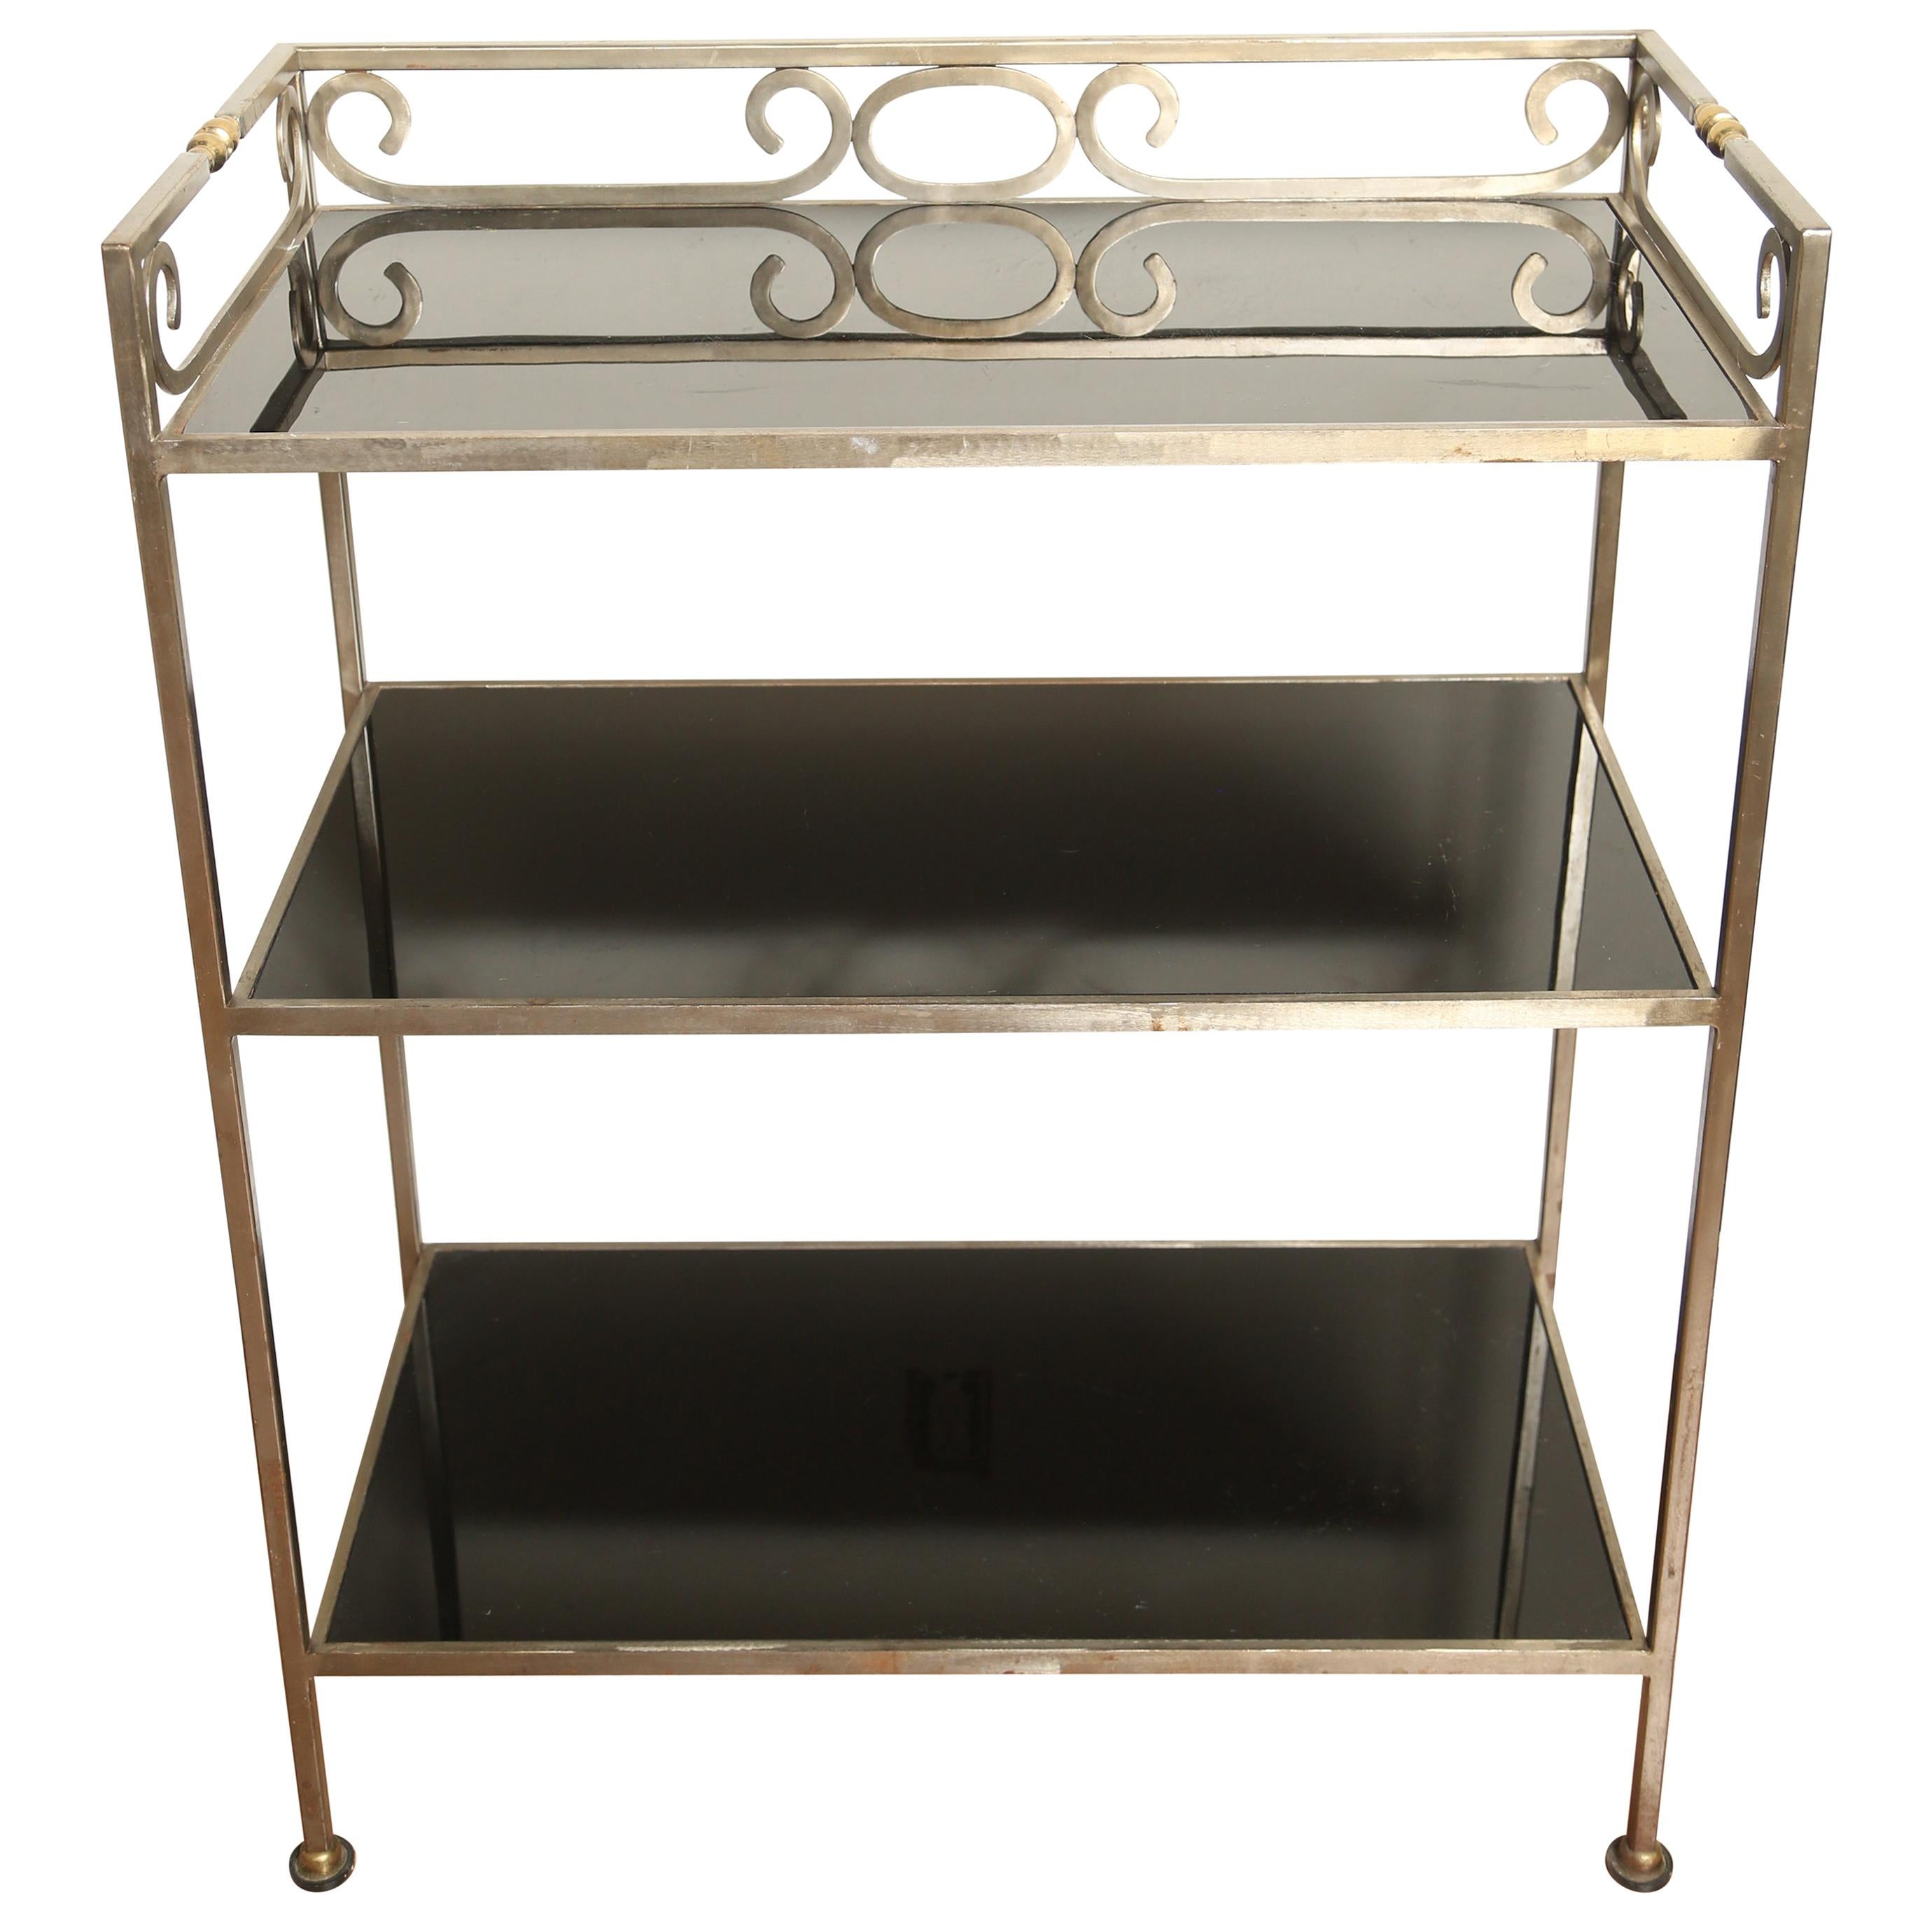 Three-Tiered Neoclassical Steel and Brass Étagère